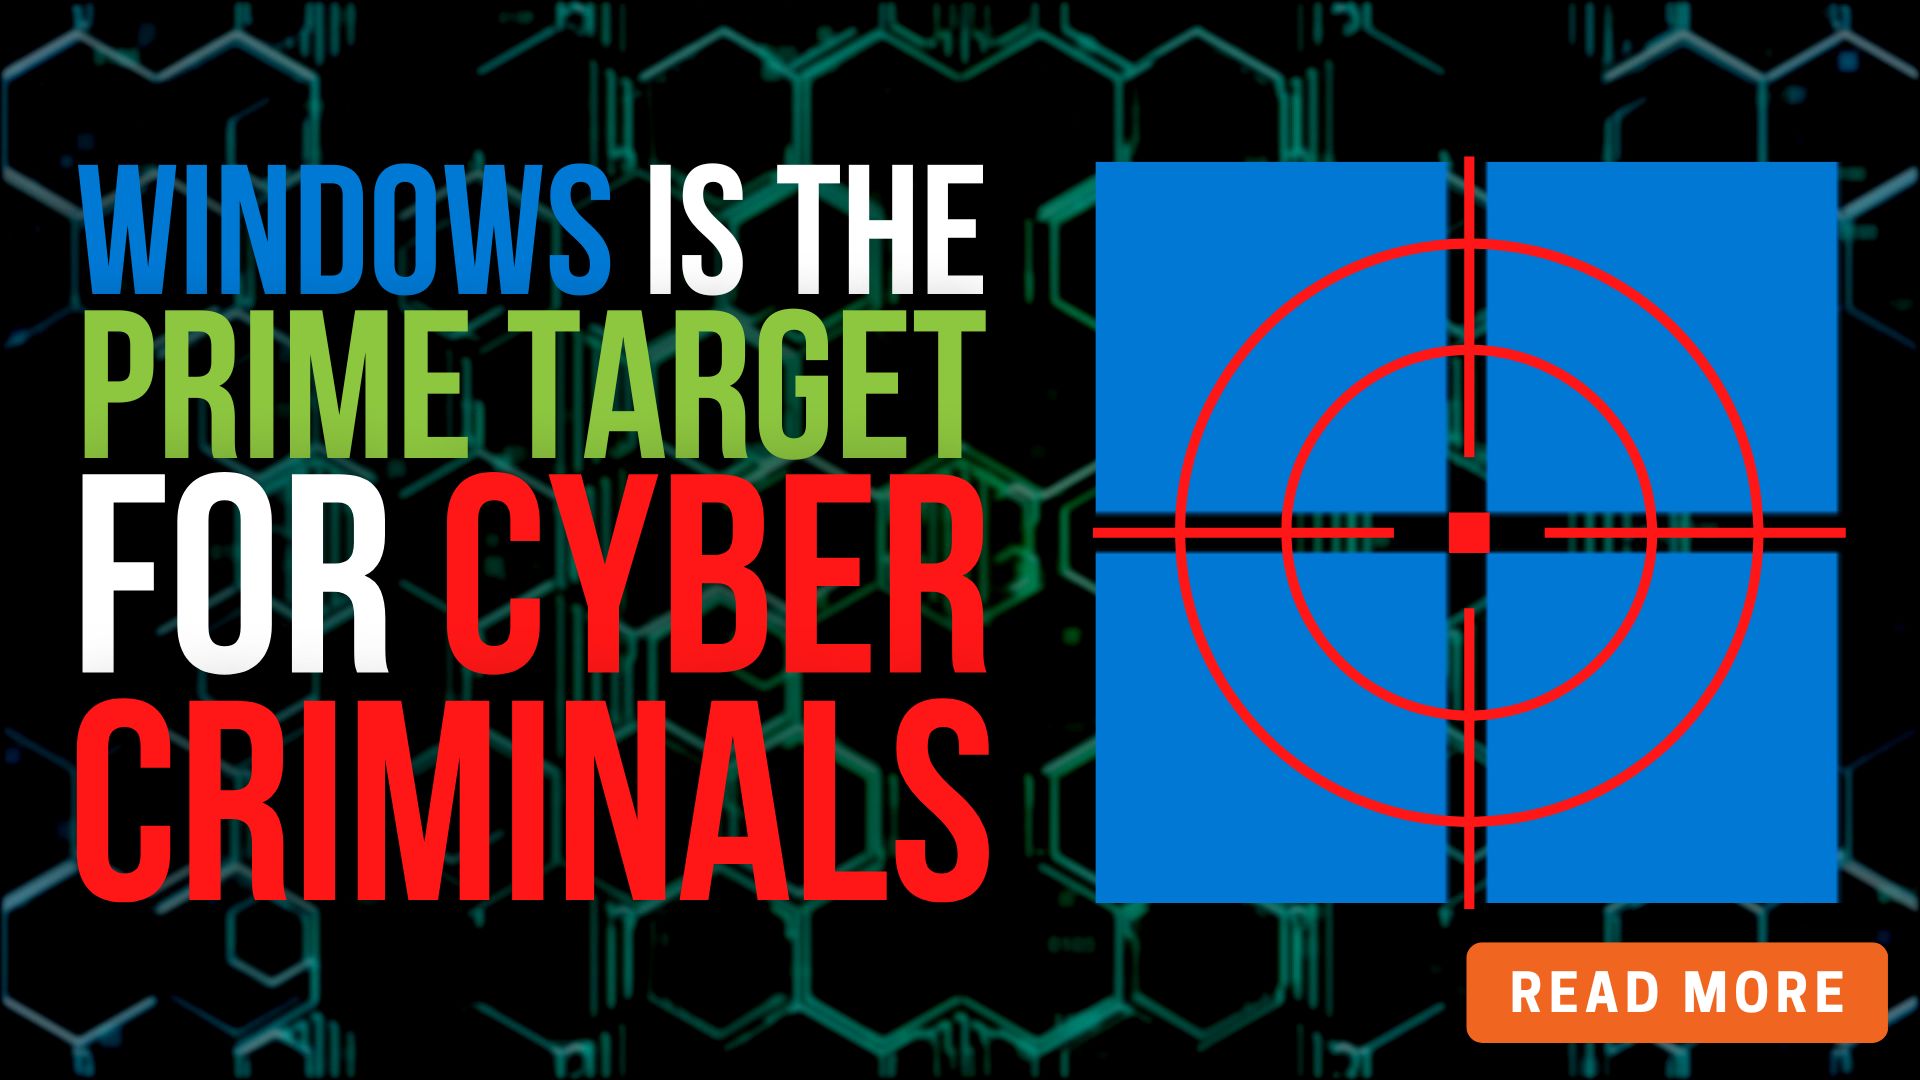 Windows is the prime target for cyber criminals